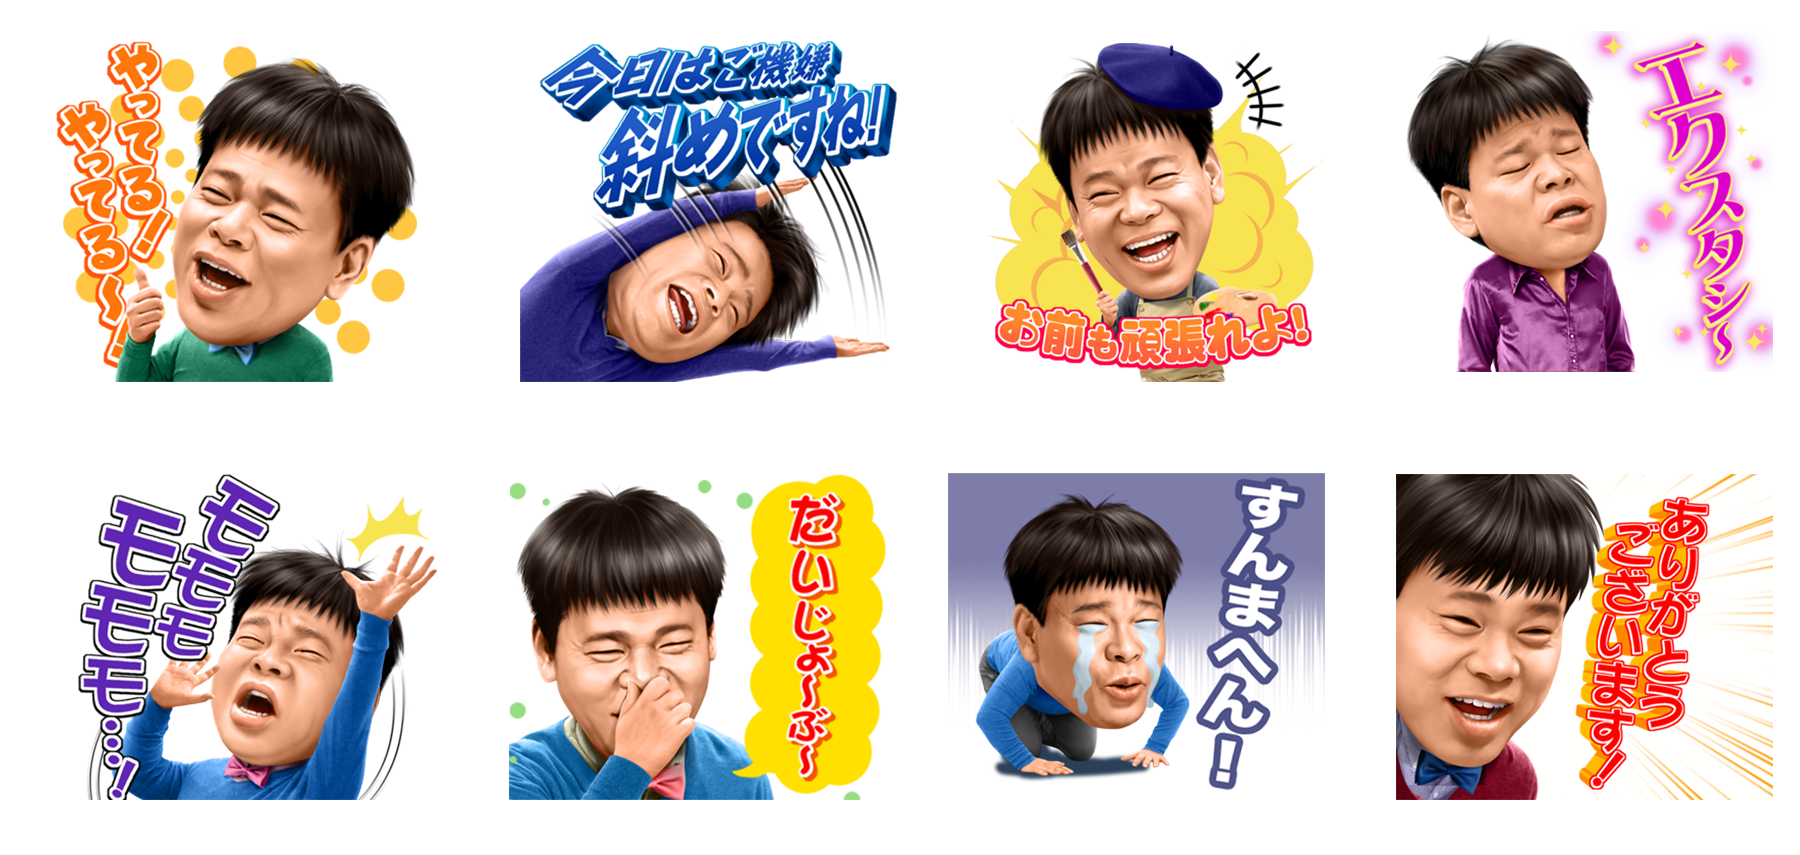 http://news.yoshimoto.co.jp/20180503151105-8492990eb0143f410e81f18738fb5b3cbf6b3f93.png